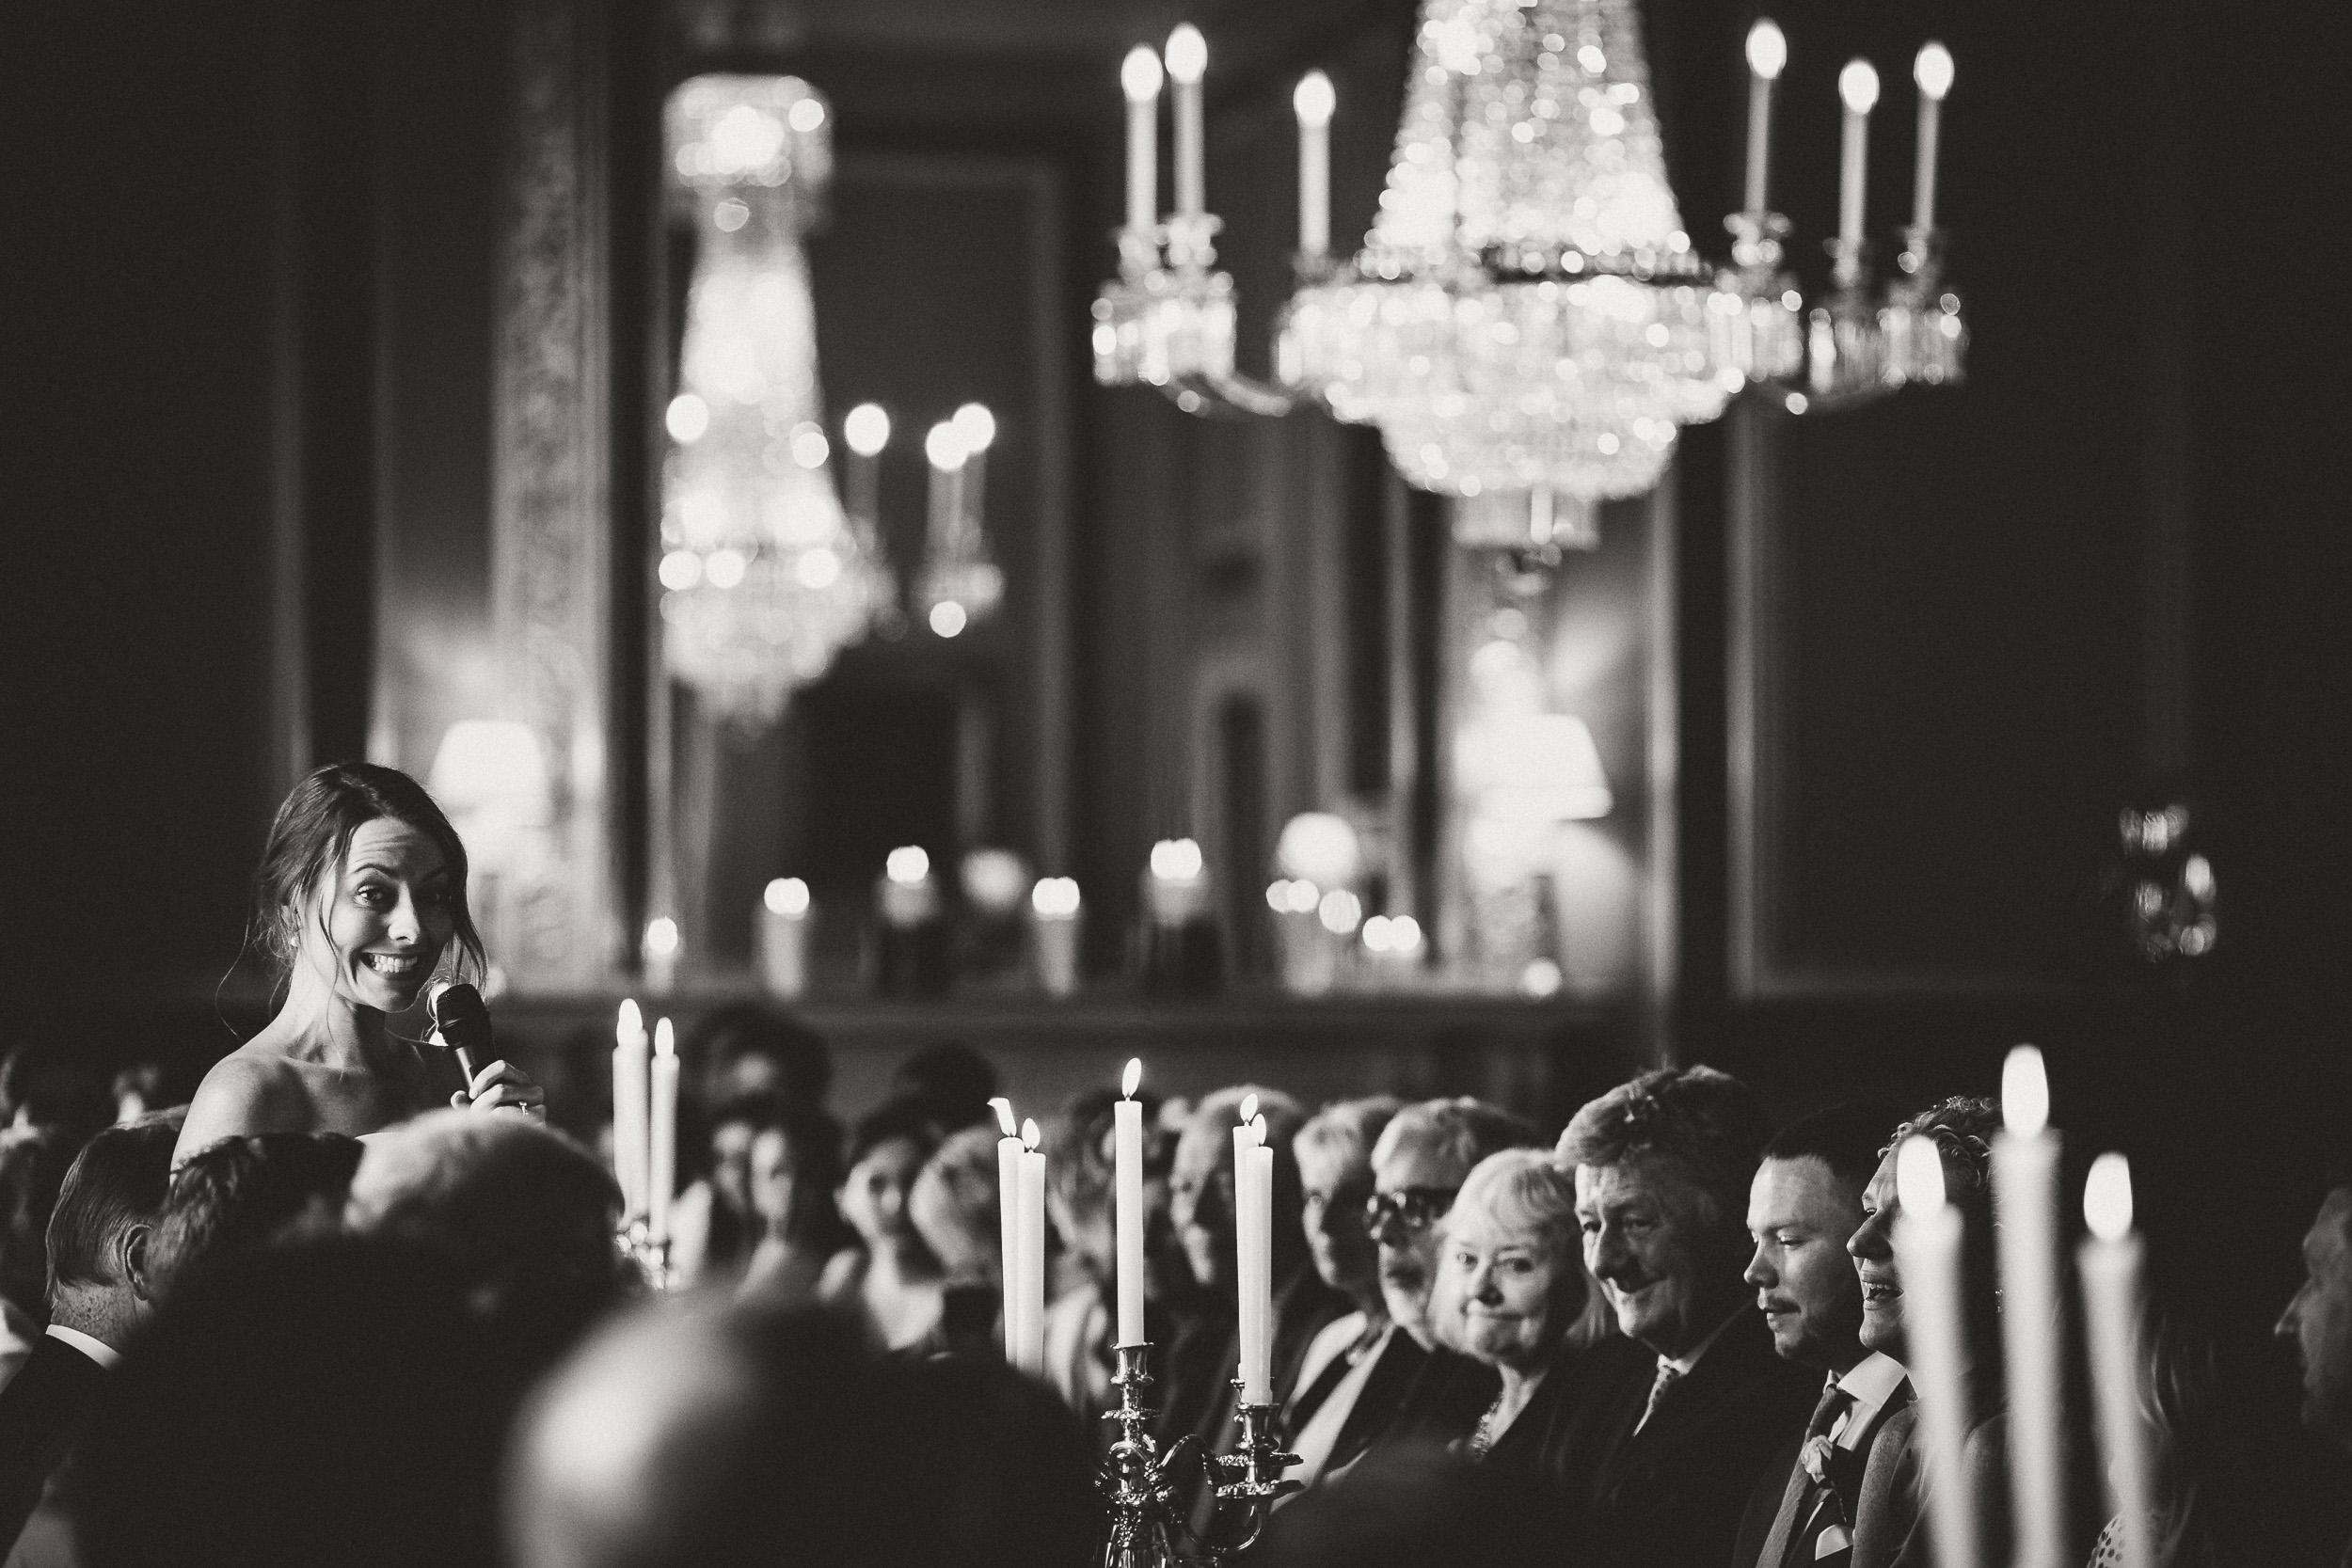 A black and white photo of a wedding with the woman speaking at the groom's side.